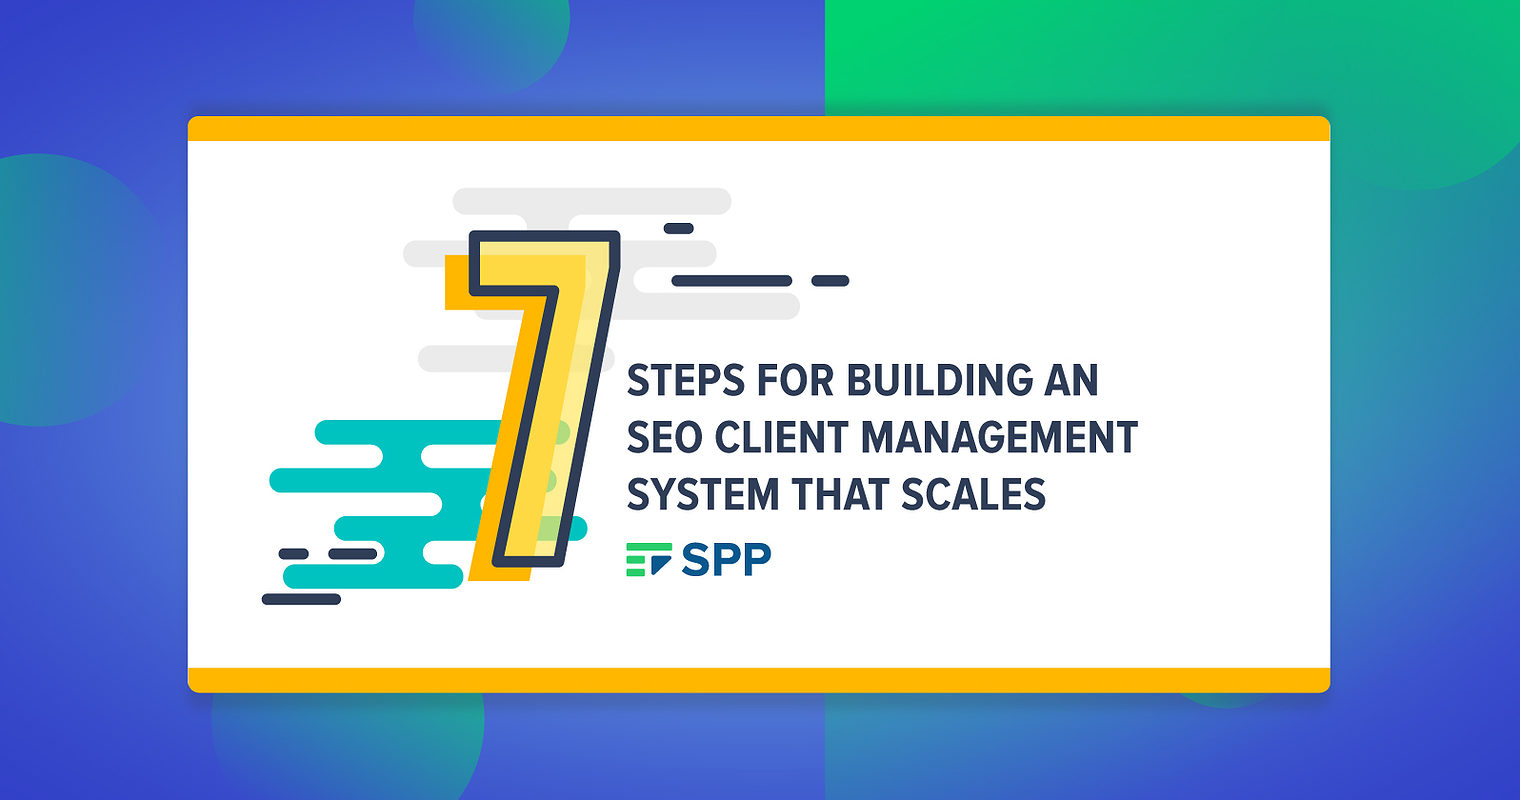 7 Steps for Building an SEO Client Management System That Scales